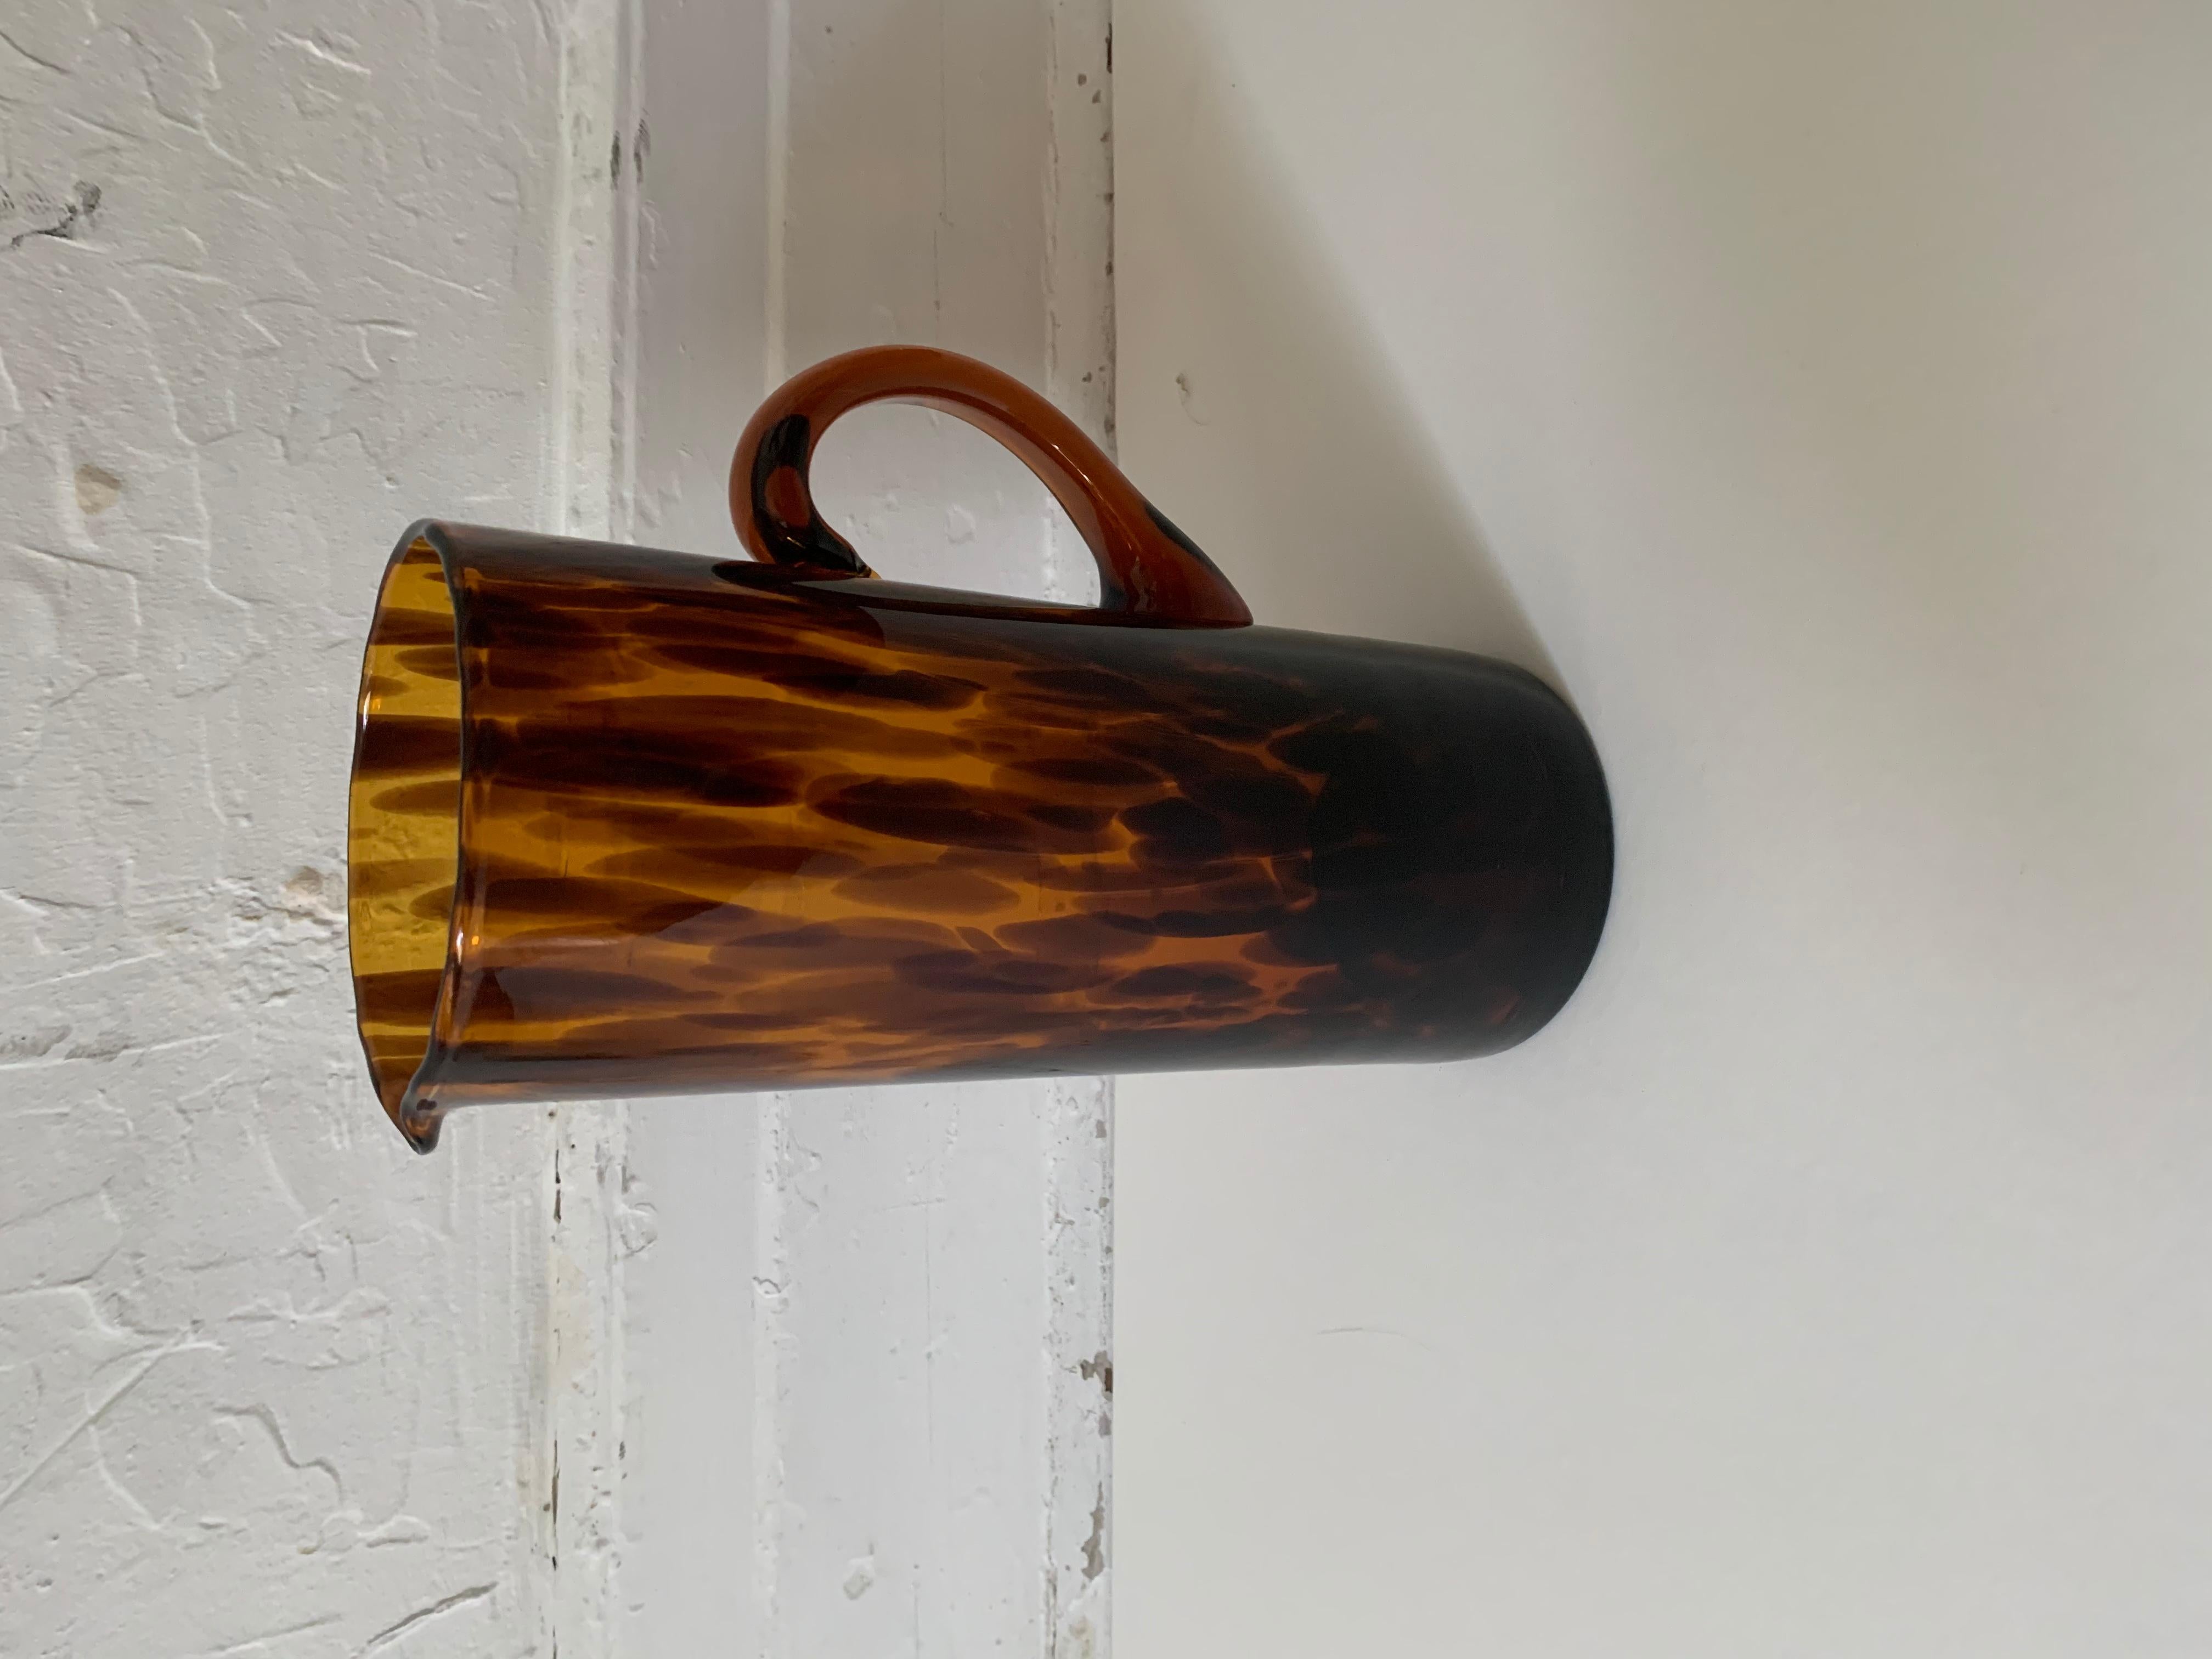 The Kendrick brown glass handled pitcher in tortoiseshell pattern by Ralph Lauren Home. Made in Italy, circa 2010. Acid etched brand stamp on underside.

Dimensions: 10.75 inches H x 6 inches L x 4.5 inches D.